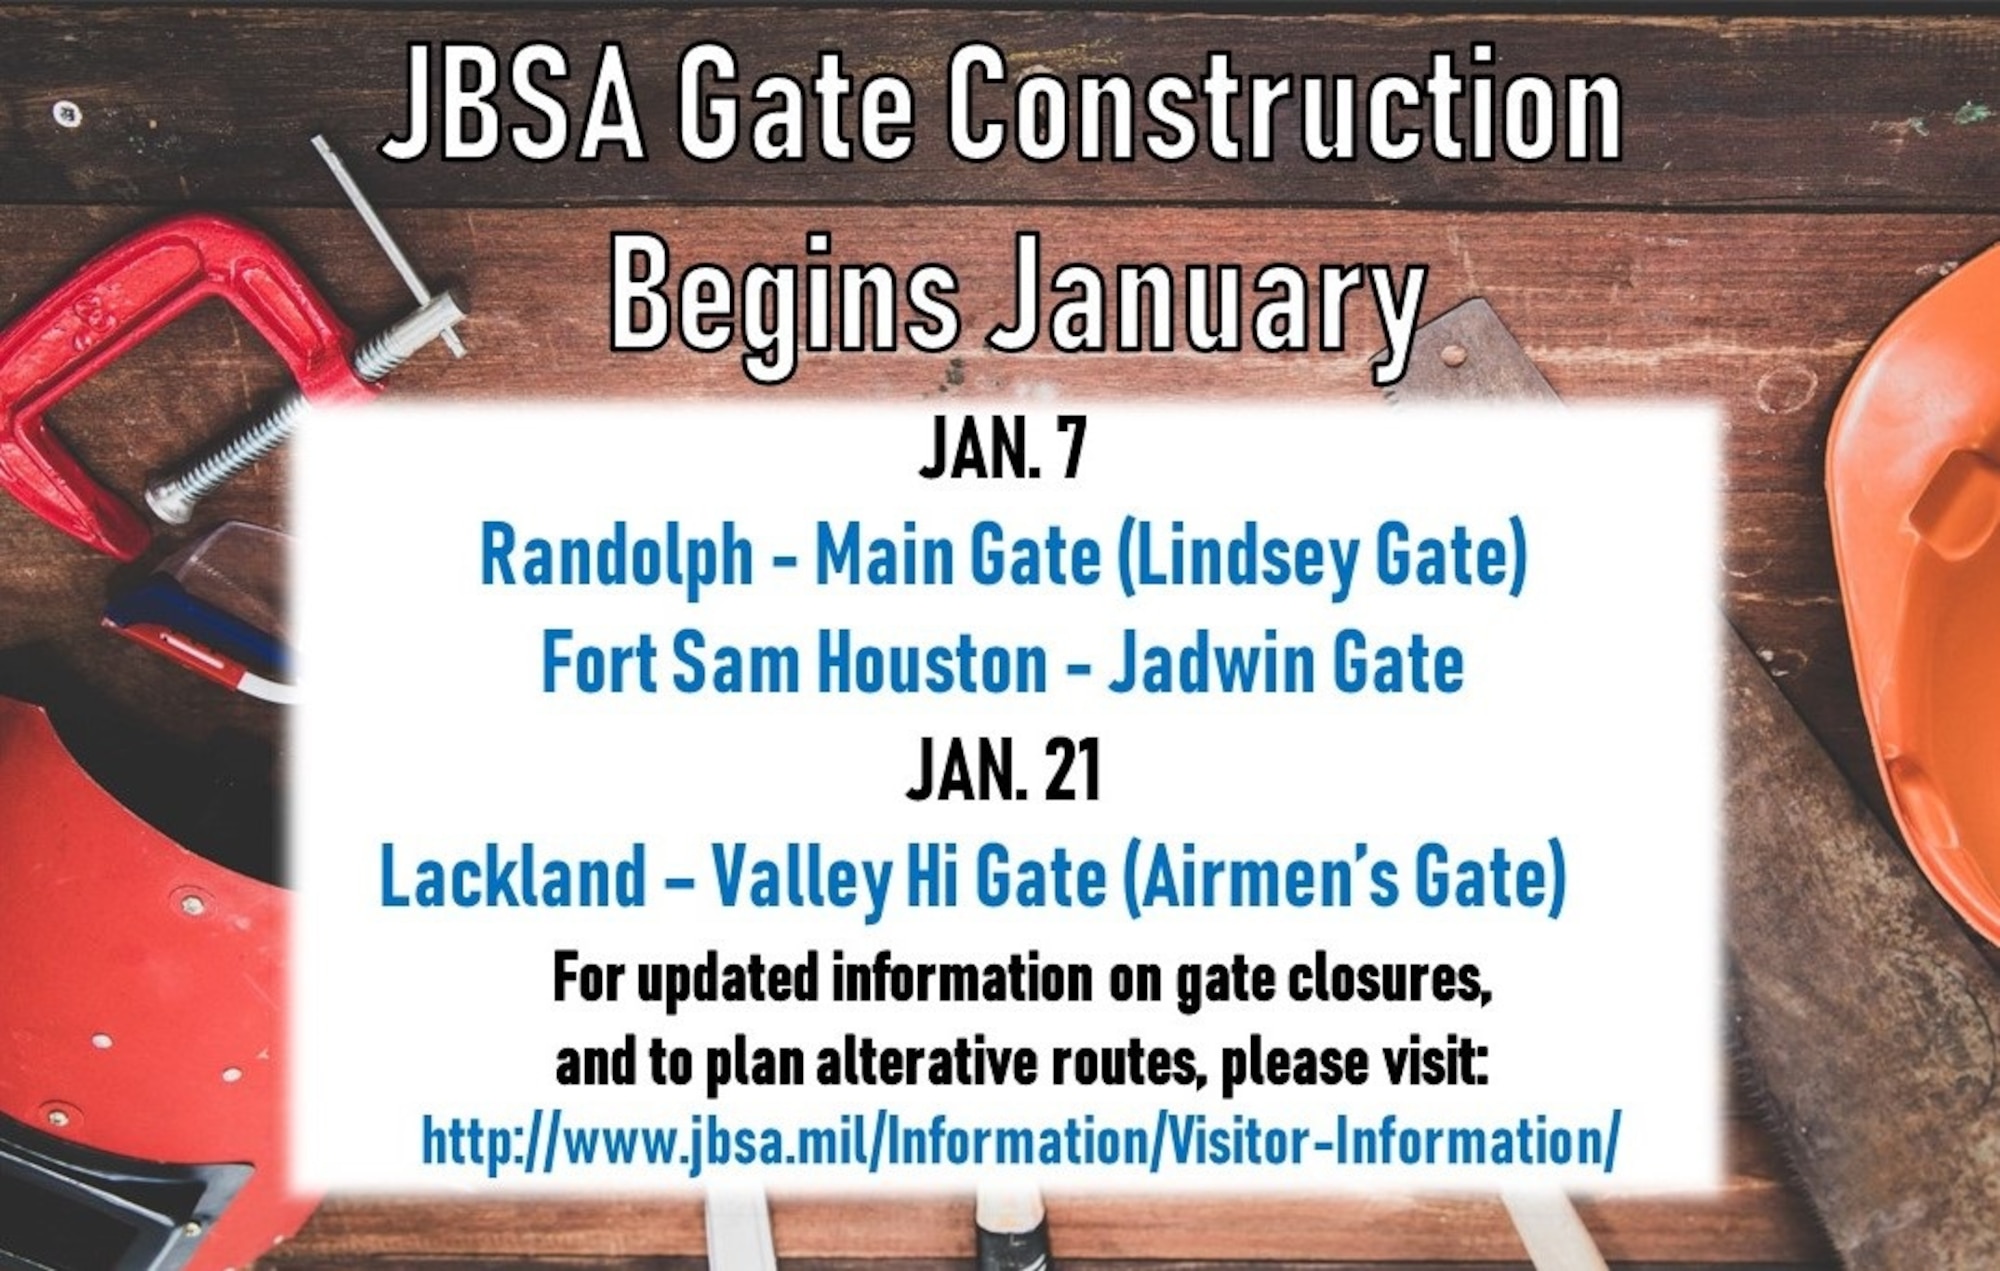 Inbound lanes for the Valley-Hi (Airmen’s Gate) will be completely closed beginning Jan. 21 while normal outbound lanes will be transitioned to accommodate two-way traffic.